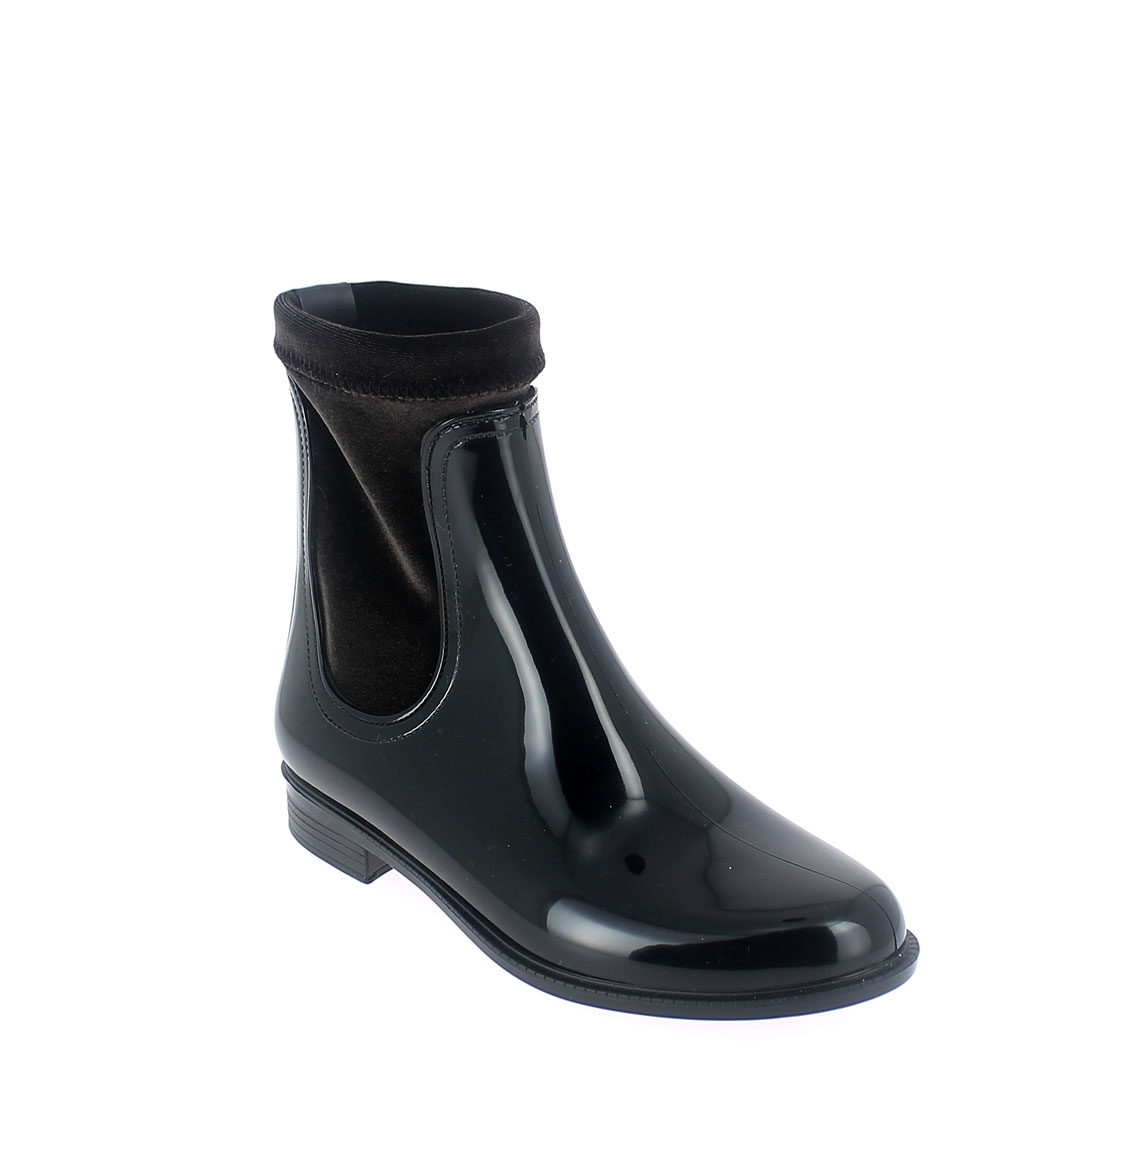 Chelsea boot in Black-Brown pvc with stretch velvet lining